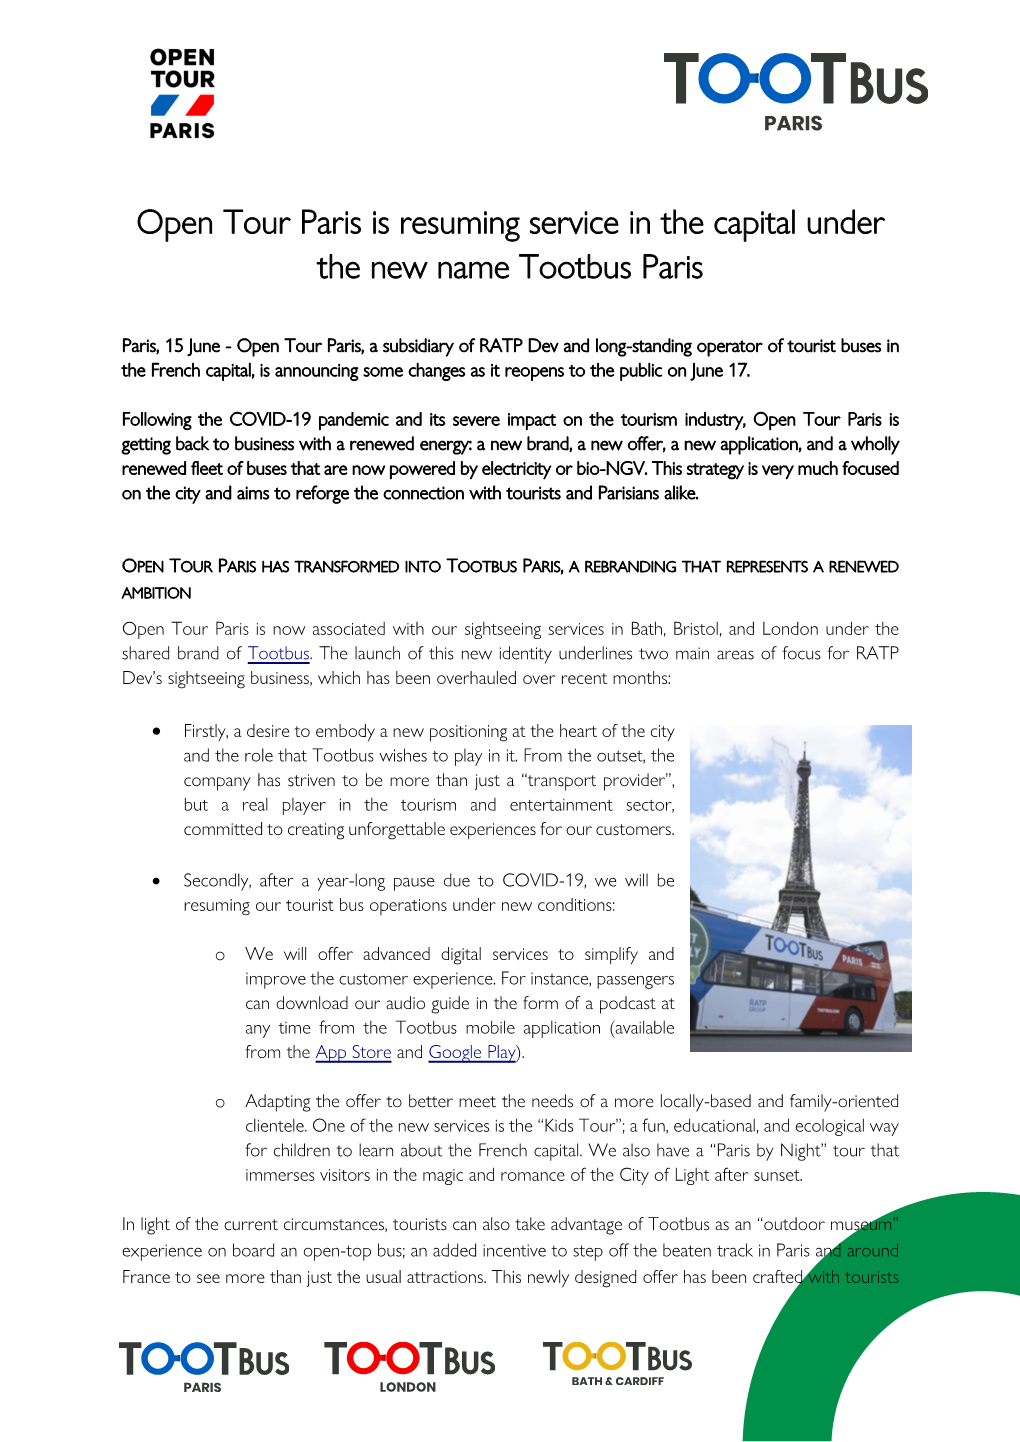 Open Tour Paris Is Resuming Service in the Capital Under the New Name Tootbus Paris